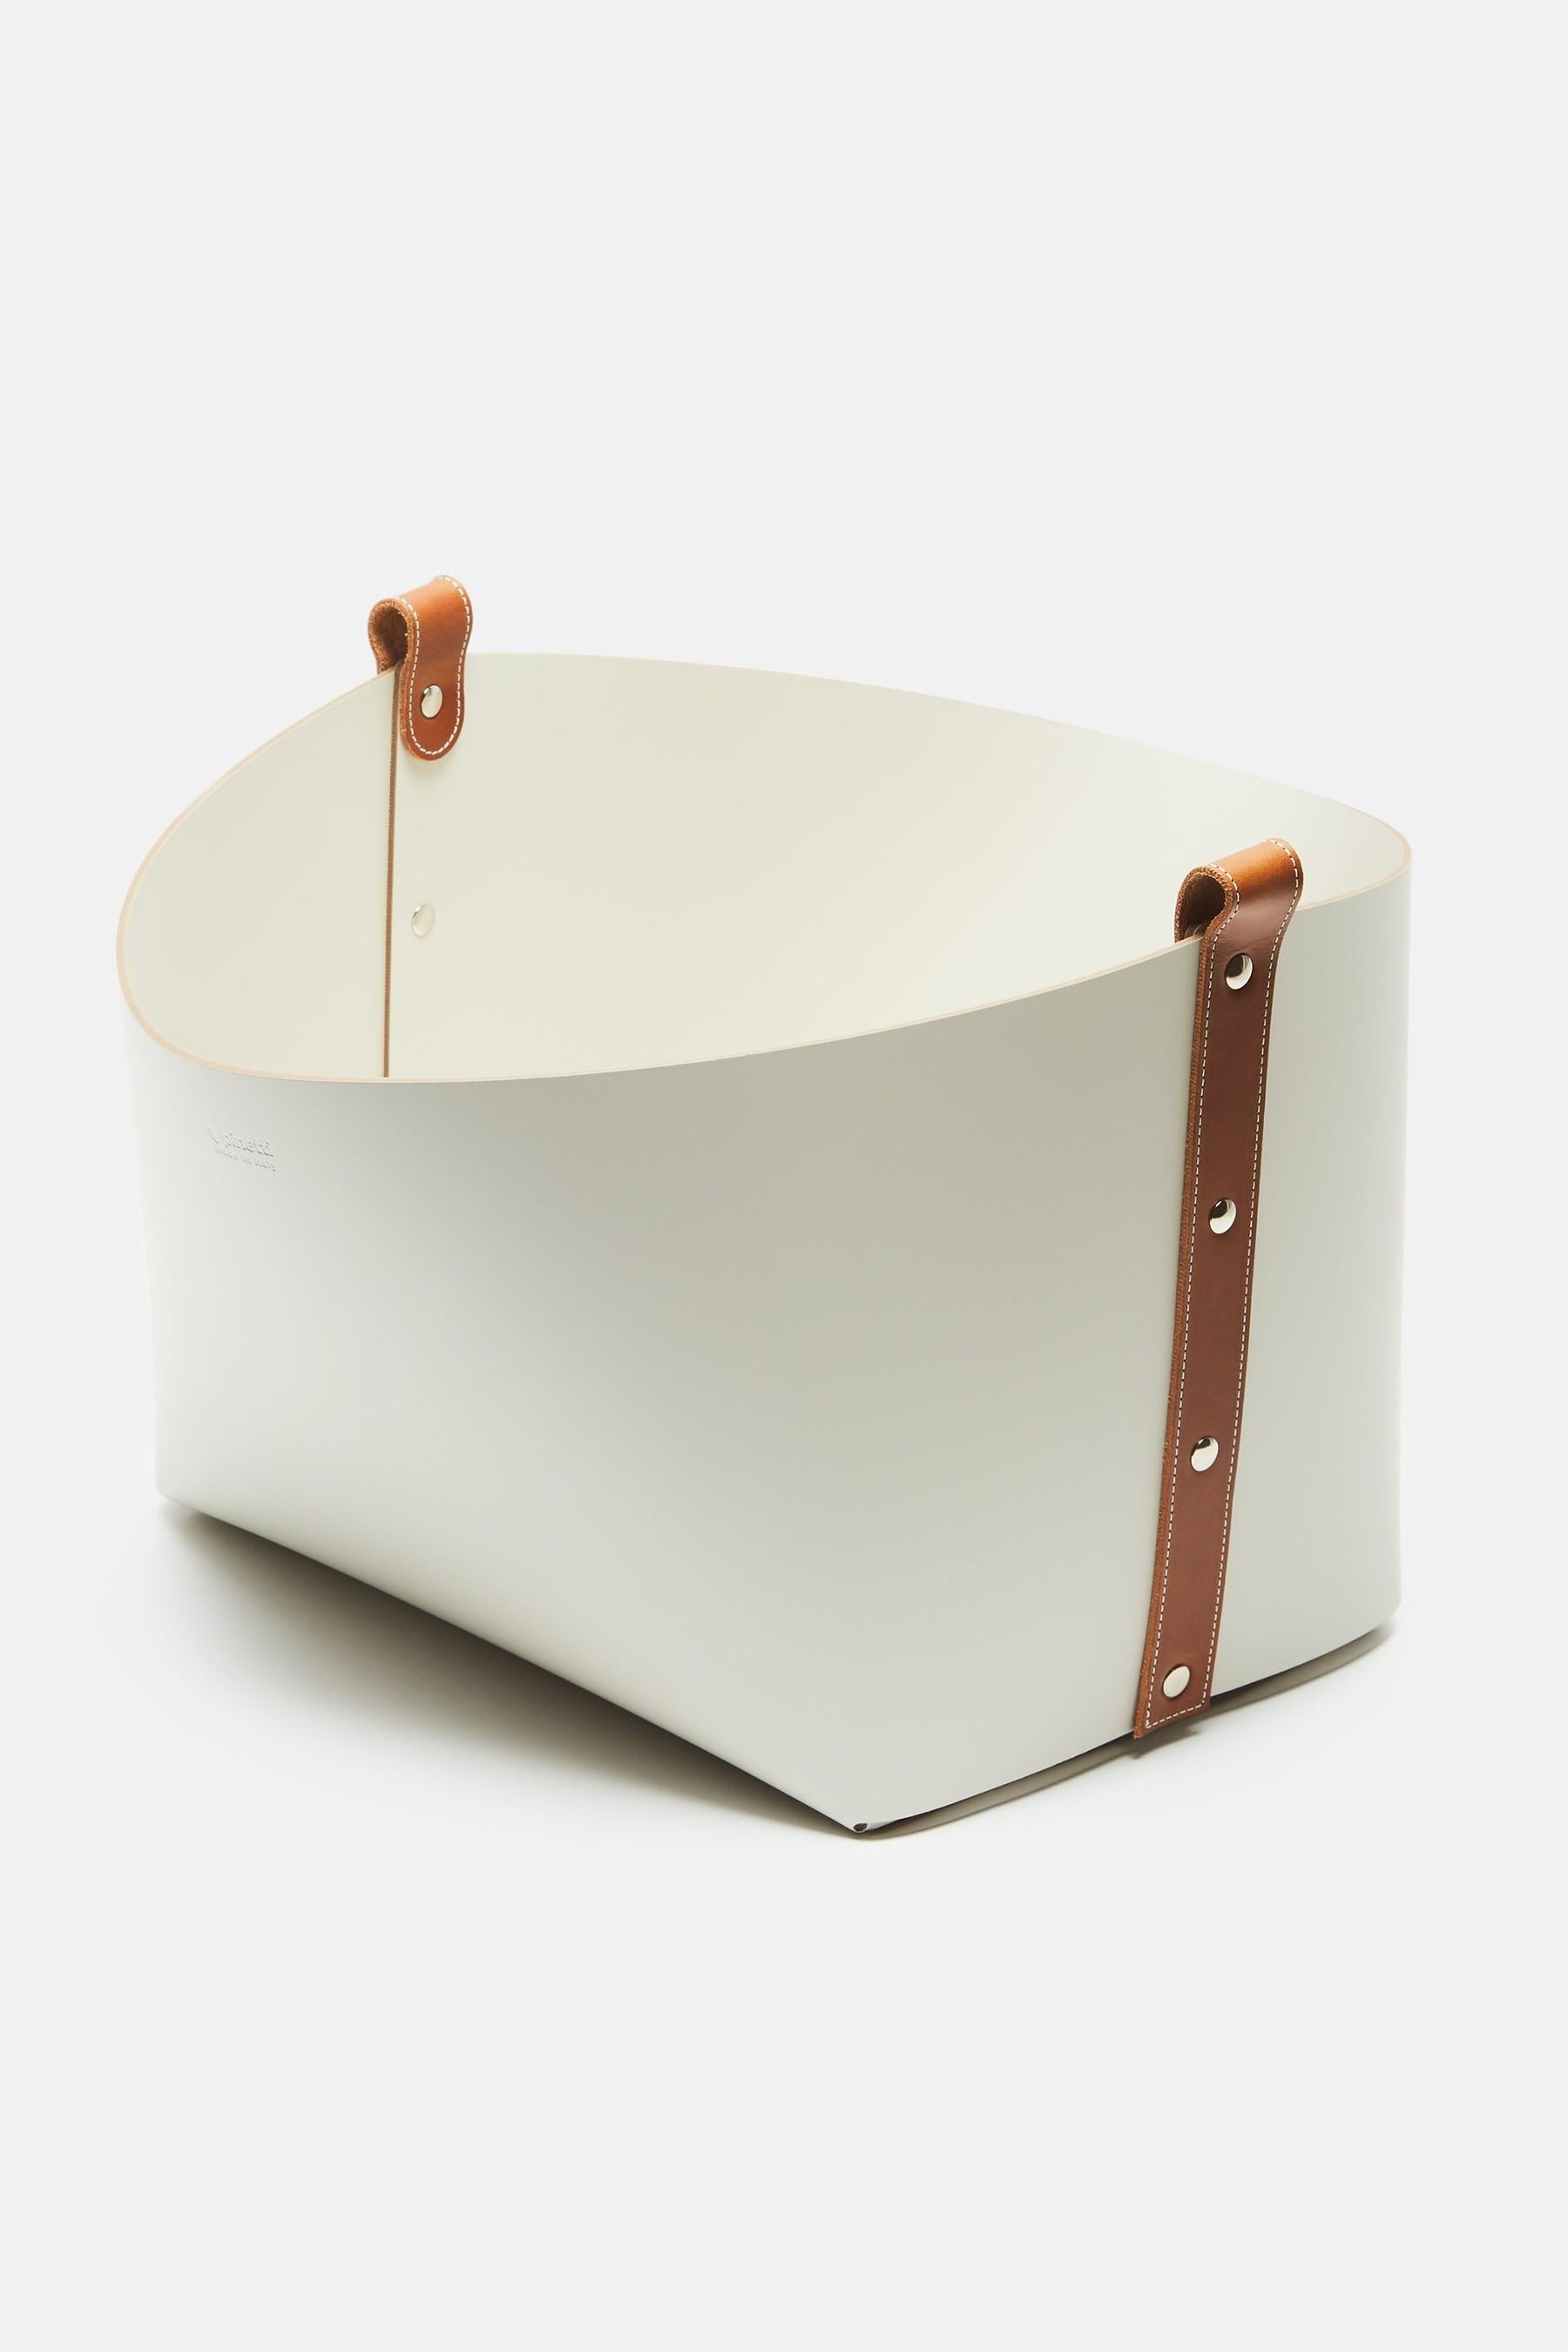 This piece belongs to the Pinetti's OVO collection of exquisitely elegant baskets made of environmentally friendly leather, that is washable, resistant to light and water and perfectly suitable for indoor as well for an outdoor use. Clean in form